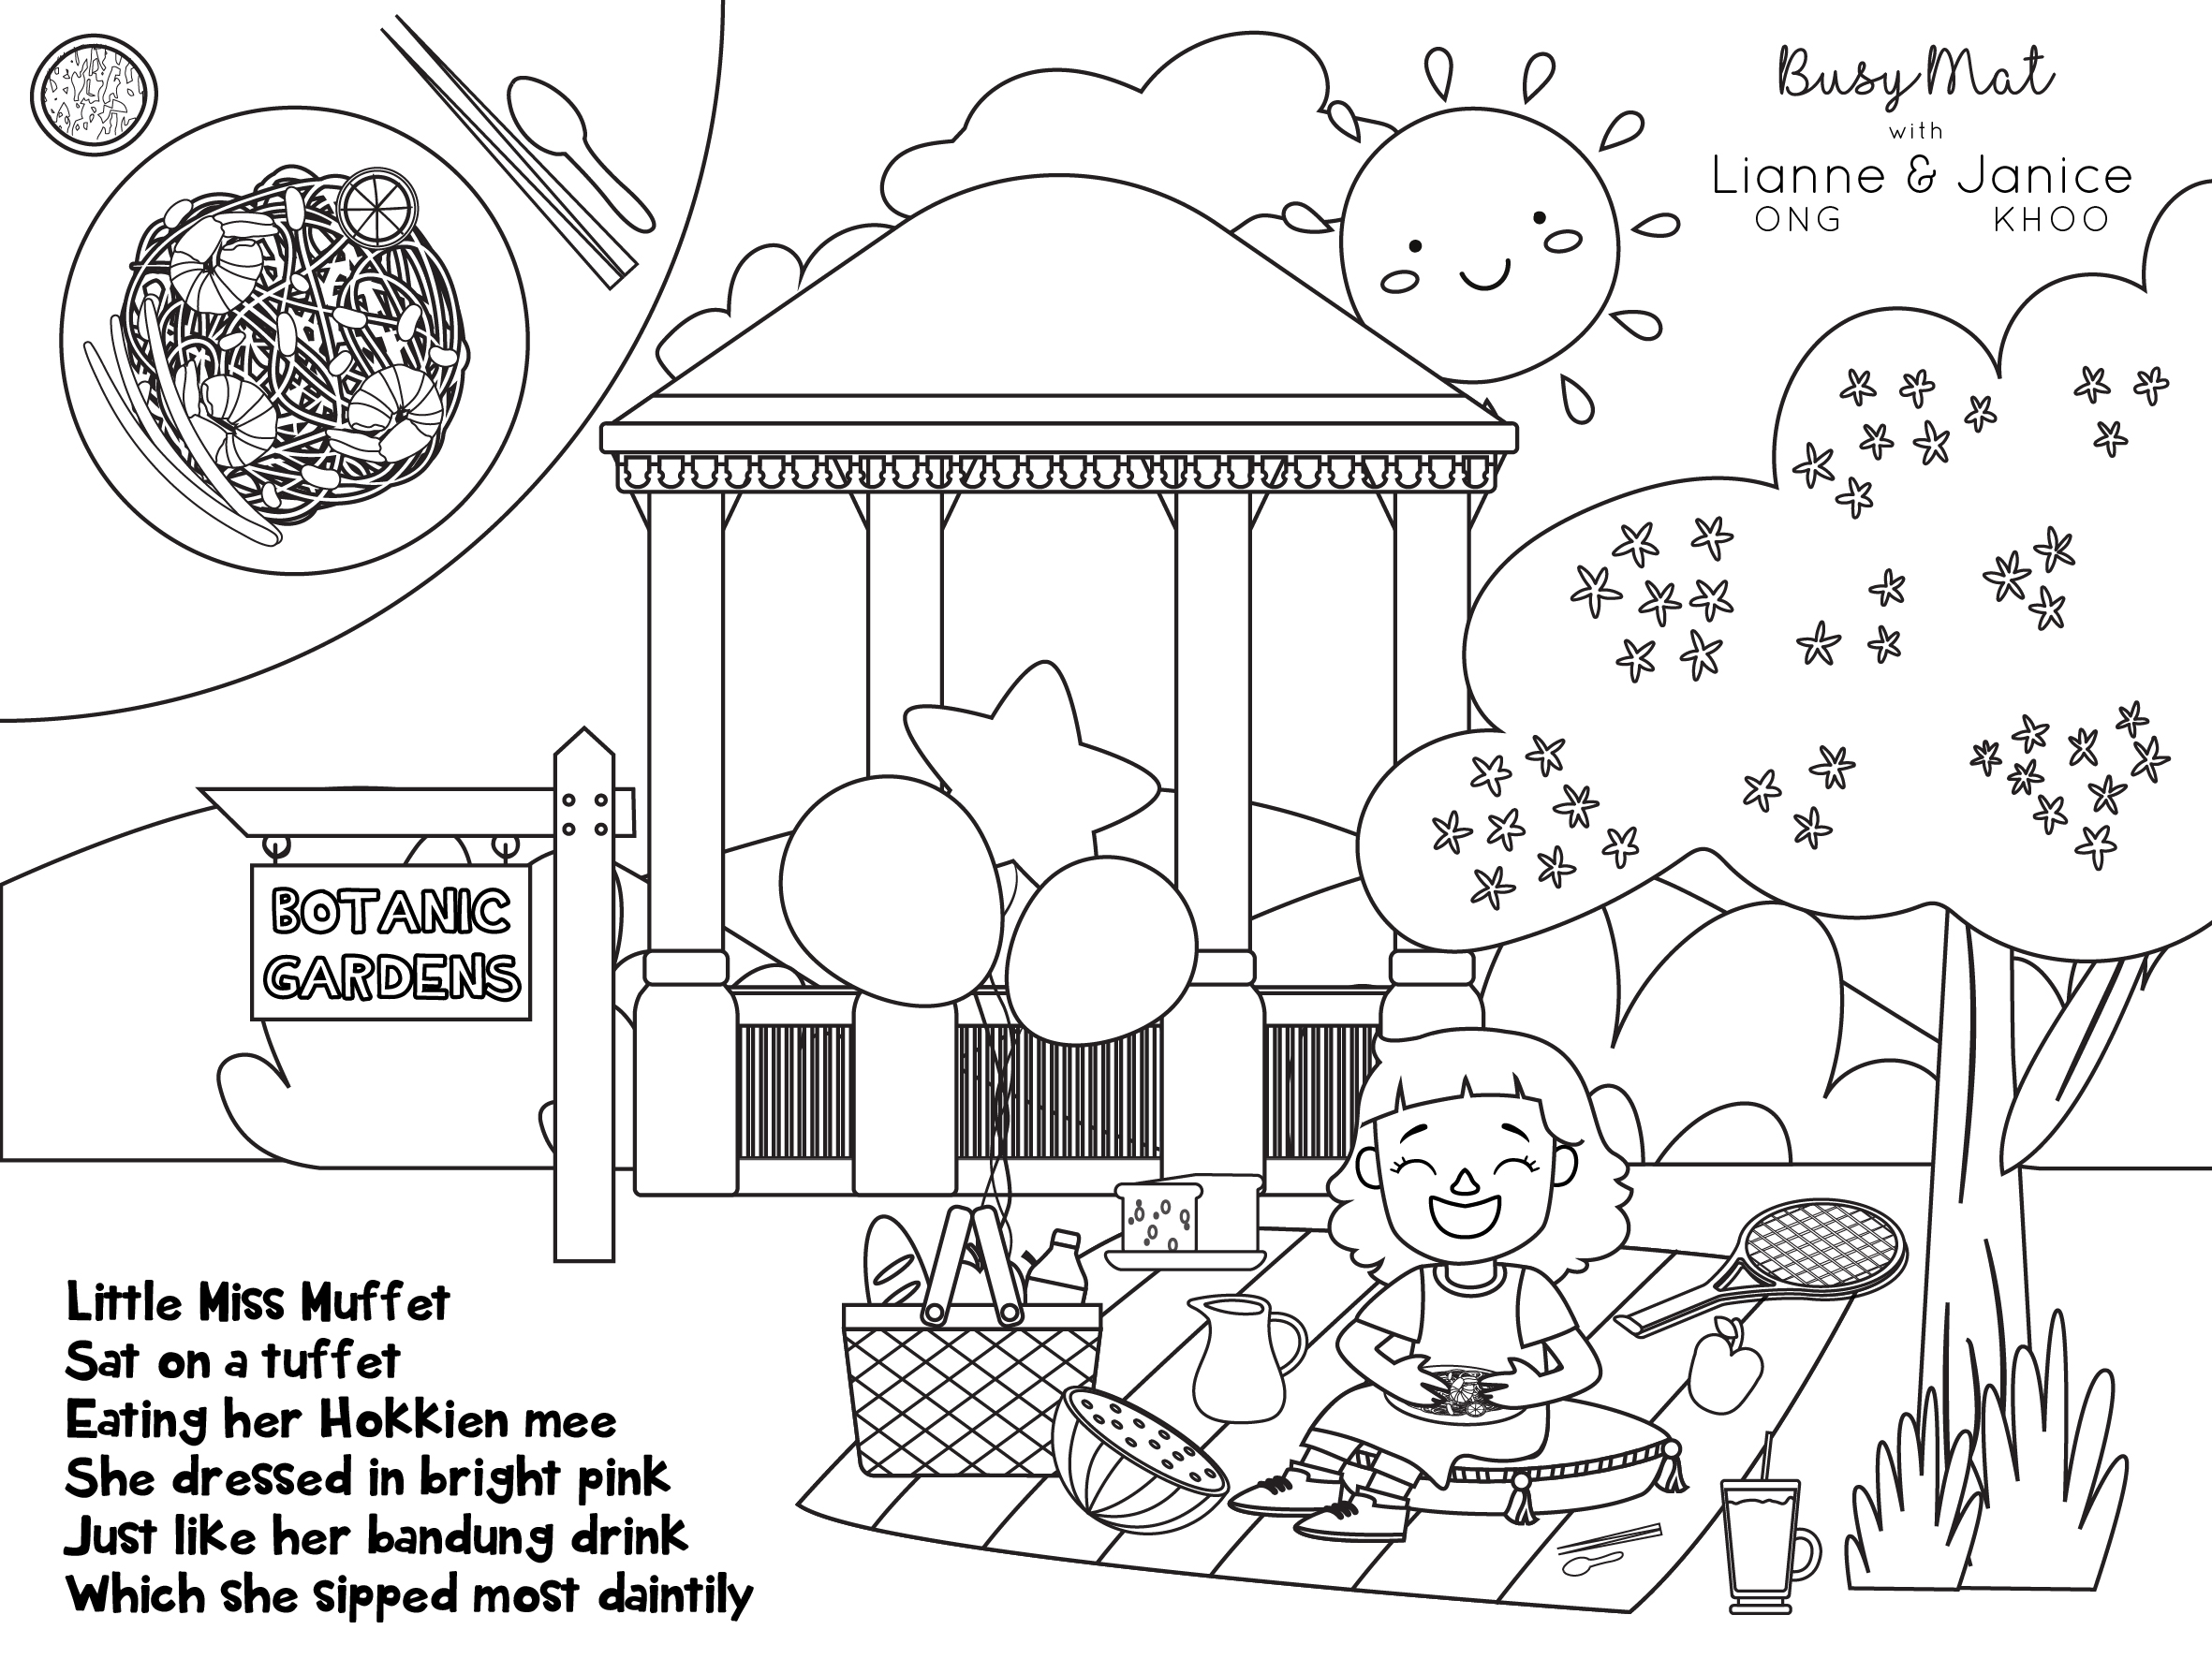 Busy Mat Singapore Hawker Food Nursery Rhyme Travel Series Placemat: Little Miss Muffet - Hokkien Mee (Placemat Only)